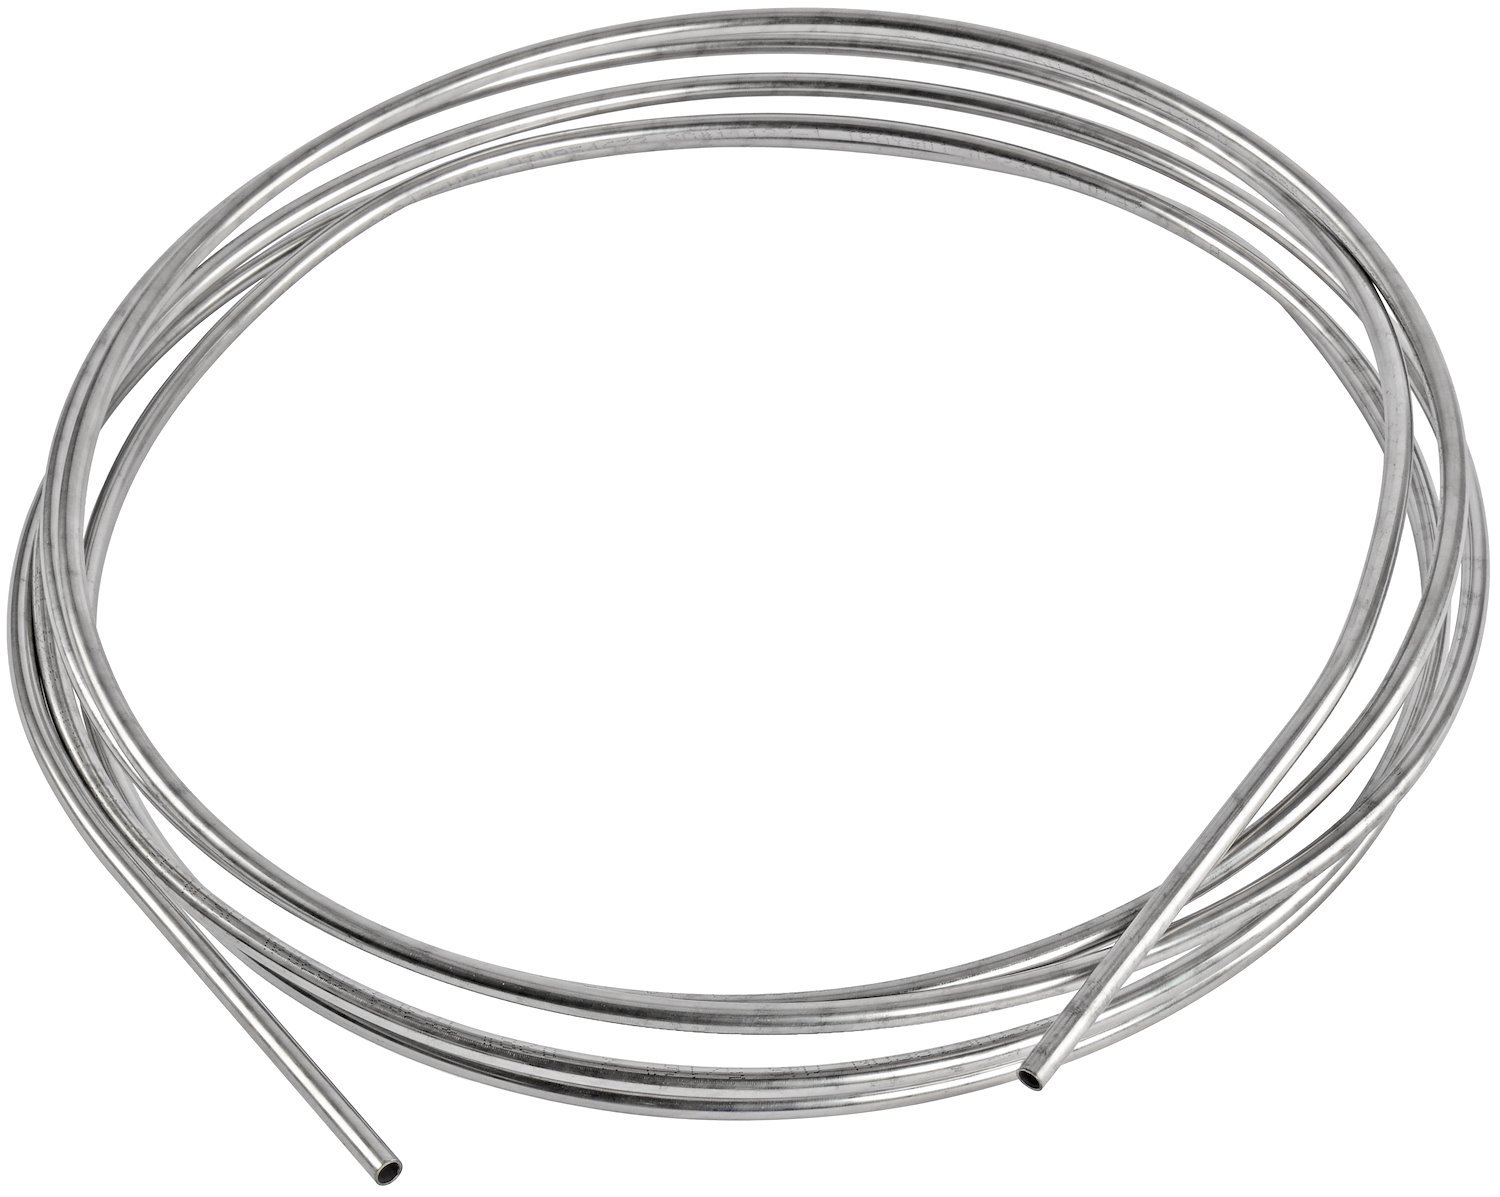 Stainless Steel Brake Line Coil [3/16 in. x 25 ft.]